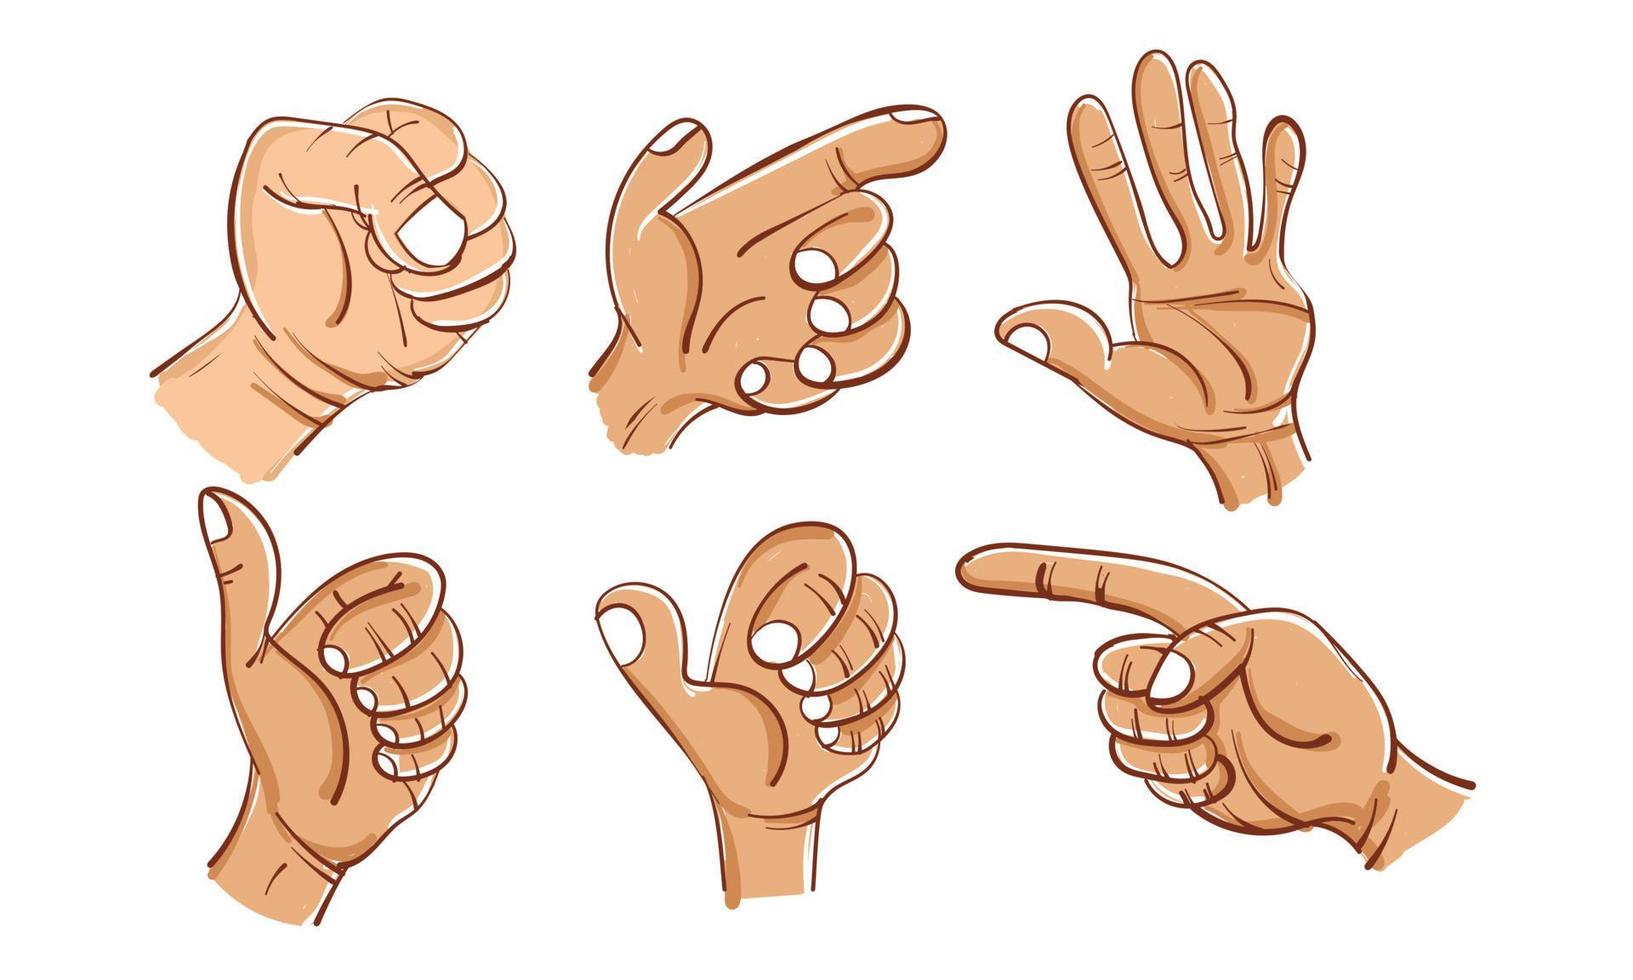 Hands set in different gestures with hand drawn cartoon style vector